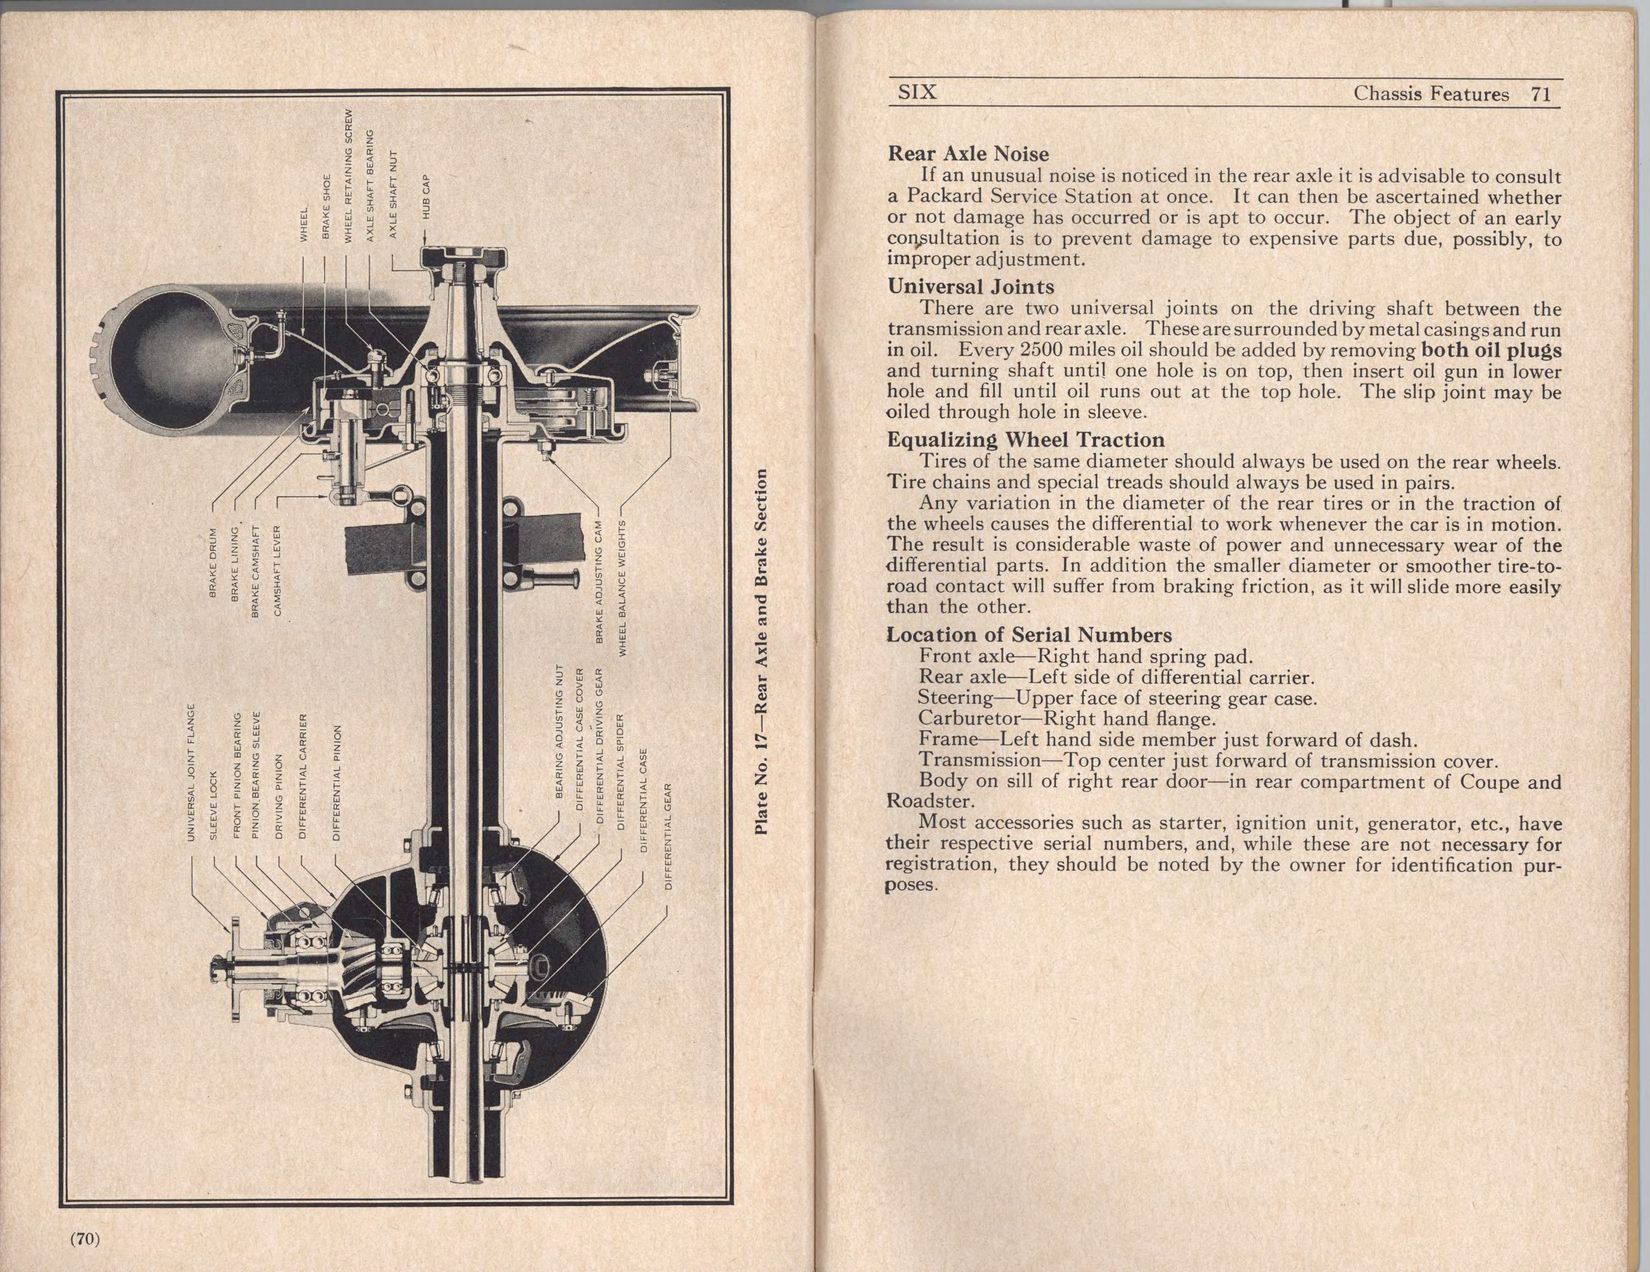 1927 Packard Six Owners Manual Page 17